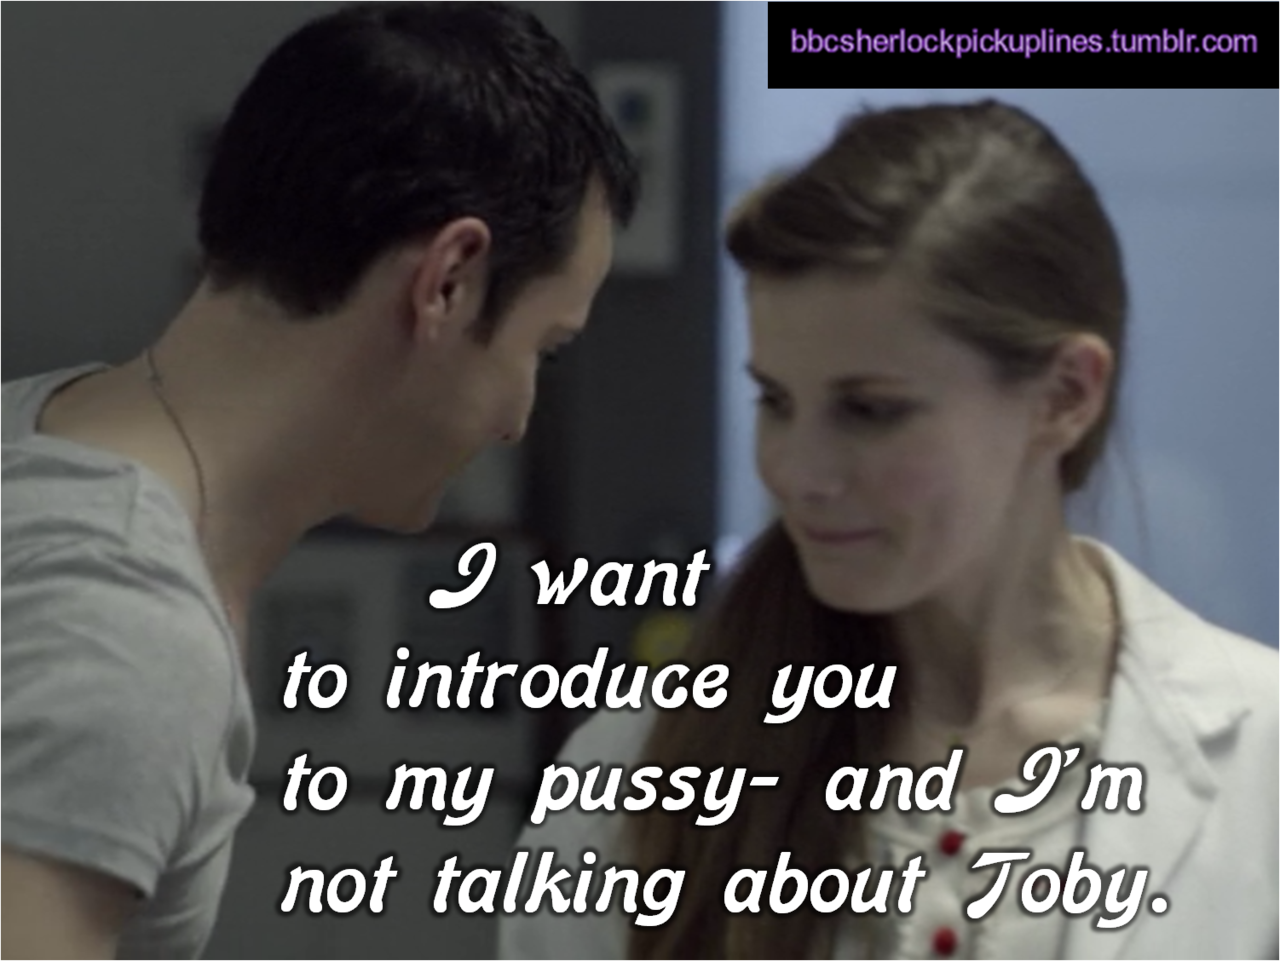 The best of Molly Hooper, from BBC Sherlock pick-up lines.